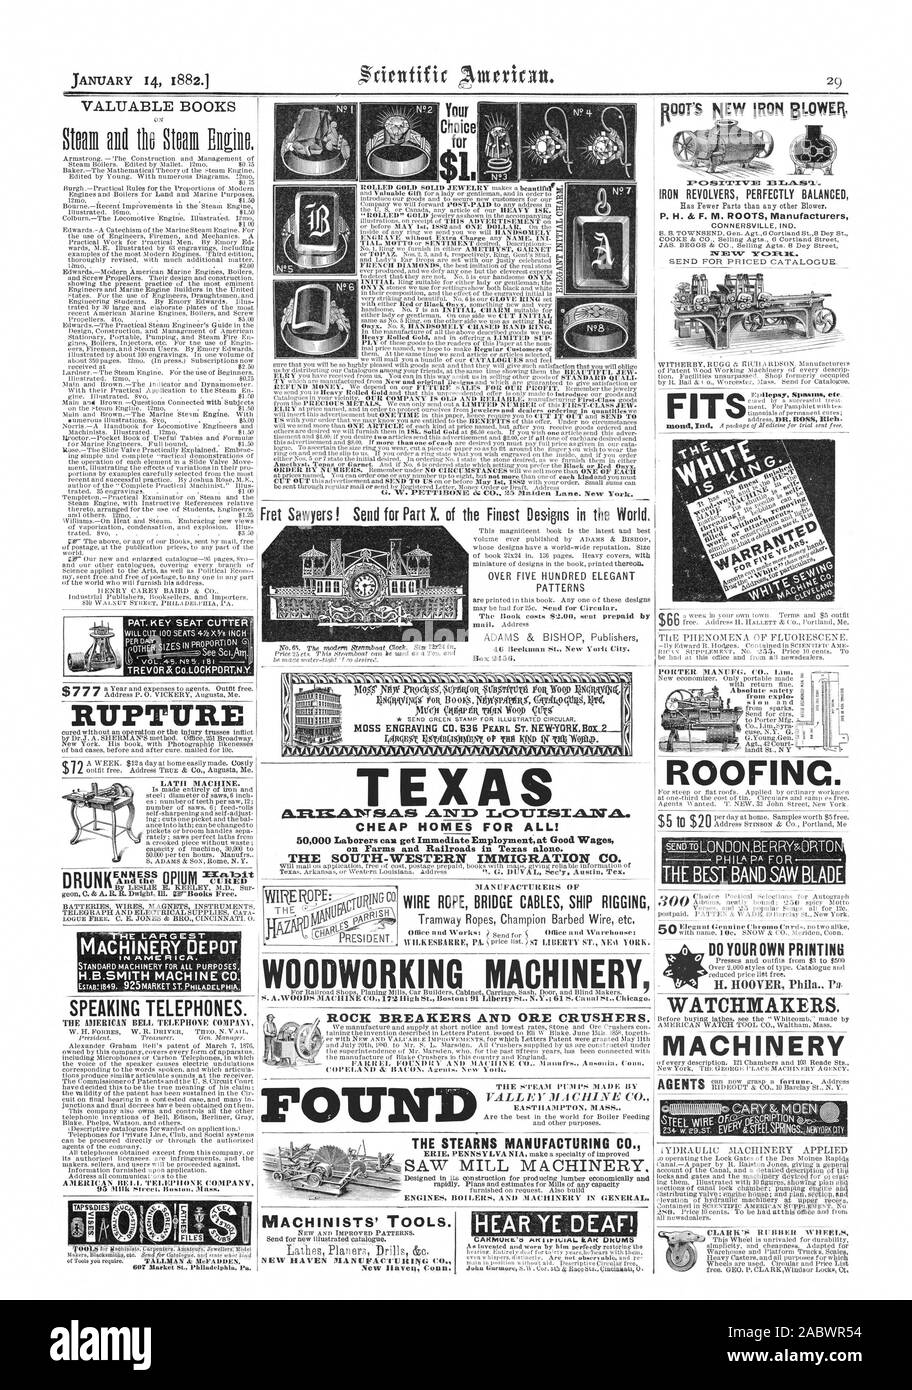 Fl G.Young.Gen. ROOFING. $5 to $20 DO YOUR OWN PRINTINU WATCHMAKERS. MACHINERY MARTI'S RUBBER 'WHEELS. RUPTURE PIUM MACHINERY DEPOT IN AME RICA. H.B.SMITH MACHINE CO. SPEAKING TELEPHONES. THE AMERICAN BELL TELEPHONE COMPANY Your for . MOSS ENGRAVING C S3S PEARL ST. NEWYORK.Bax.2 crukrkrkrvifkrkr rkfkr rvirkrif rkrkrifkraVoikriArilStilMfkri ROCK BREAKERS AND ORE CRUSHERS. THE STEARNS MANUFACTURING CO. WIRE ROPE BRIDGE CABLES SHIP RIGGING Tramway Ropes Champion Barbed Wire etc WOODWORKING MACHINERY TEXAS THE SOUTH-WESTERN IMMIGRATION CO. VALUABLE BOOKS IN`1. - '0:150 k MACHINISTS' TOOLS. HEAR YE Stock Photo